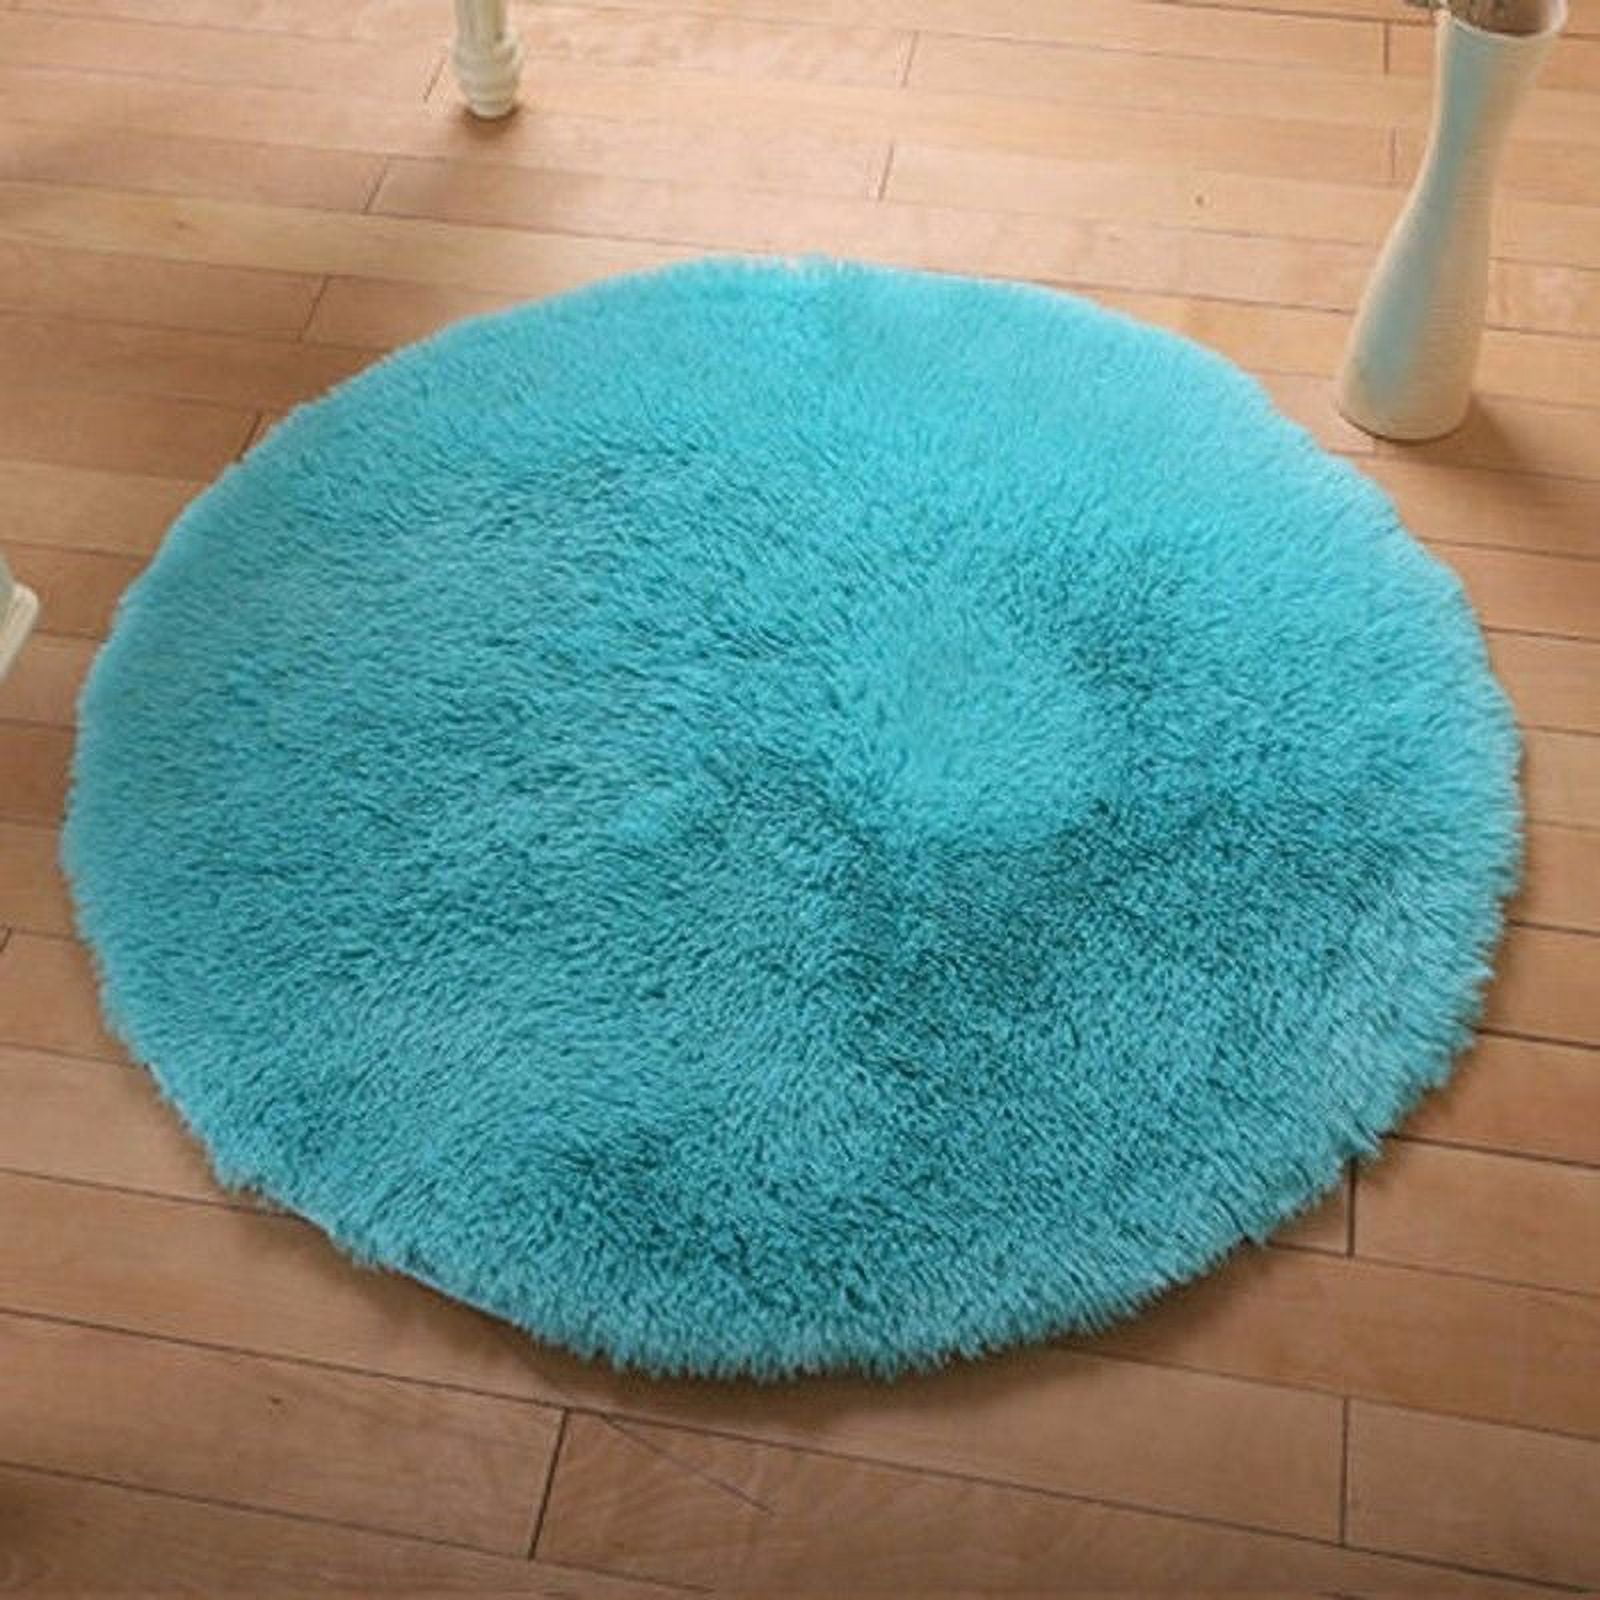  Round Area Rug, Kitchen Rug Bath Mat, Shaggy Carpet, Entryway  Mat - Goth Moon Frogs Moth Magical Mushroom Leaves Art Rugs Mat for Living  Room Bedroom Home, Quick Dry, Anti-Skid Backing 